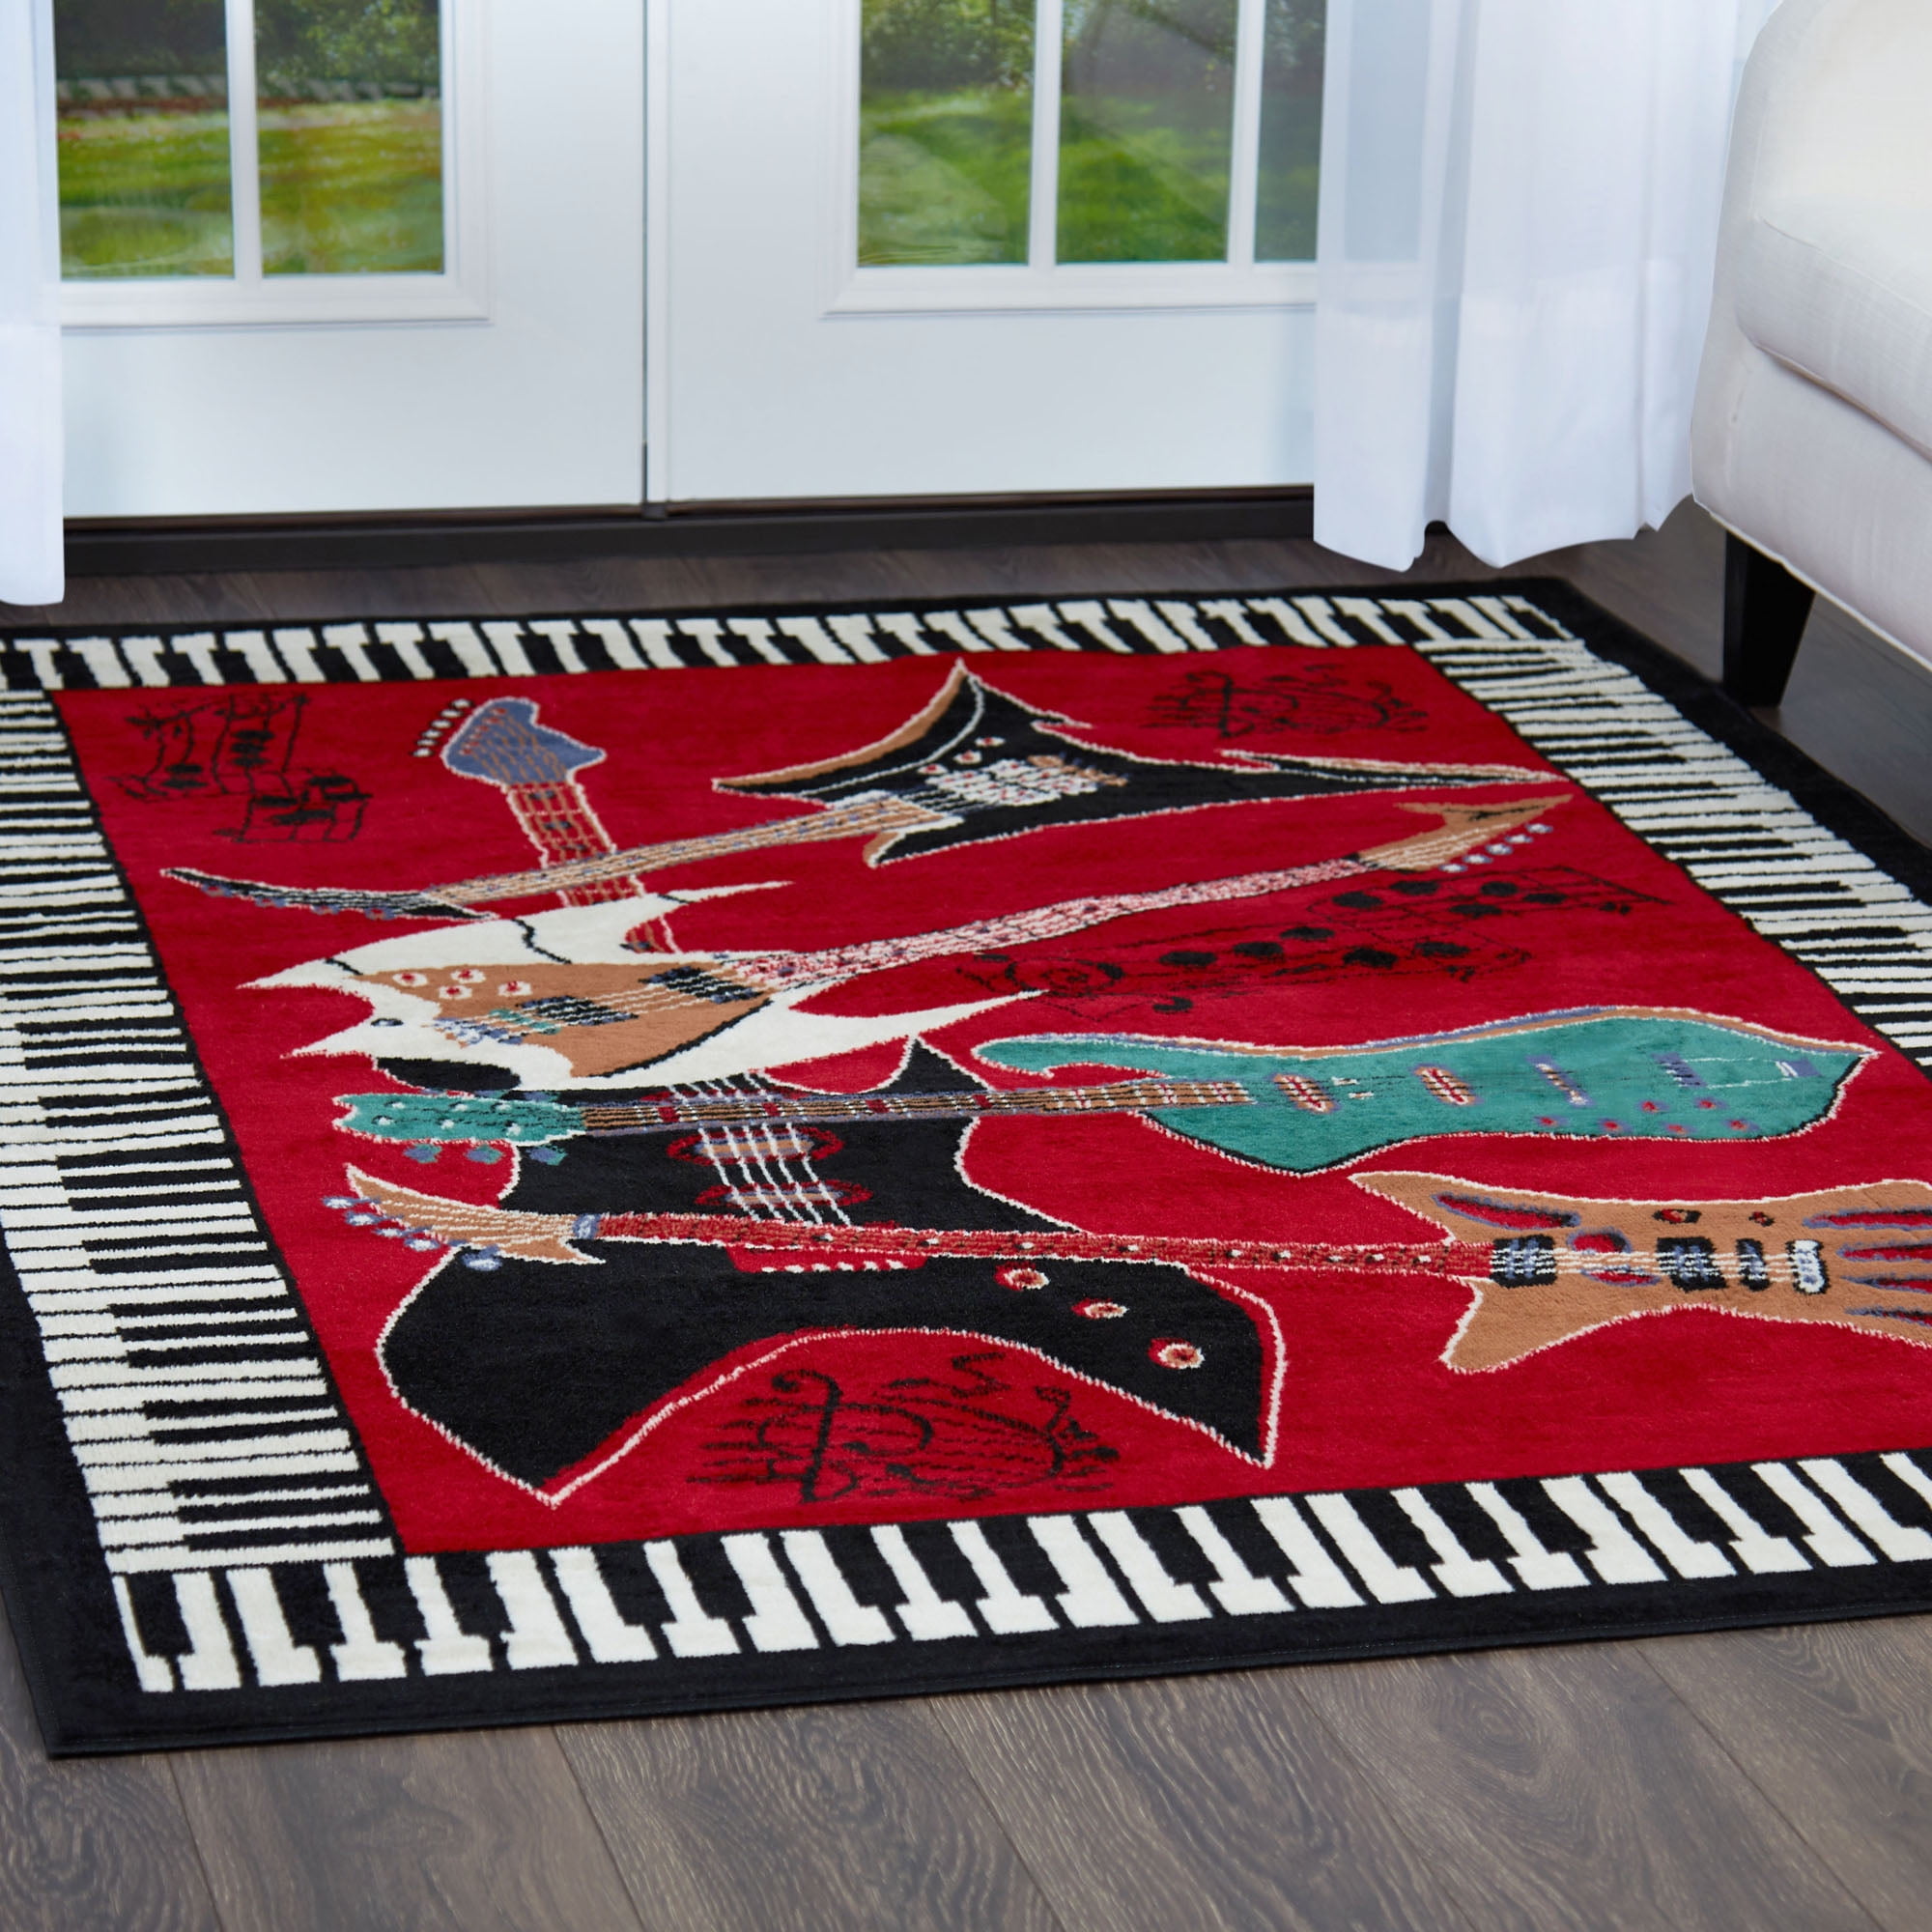 ALAZA Music Notes Flying Abstract Vintage Collection Area Mat Rug Rugs for Living Room Bedroom Kitchen 2' x 6'